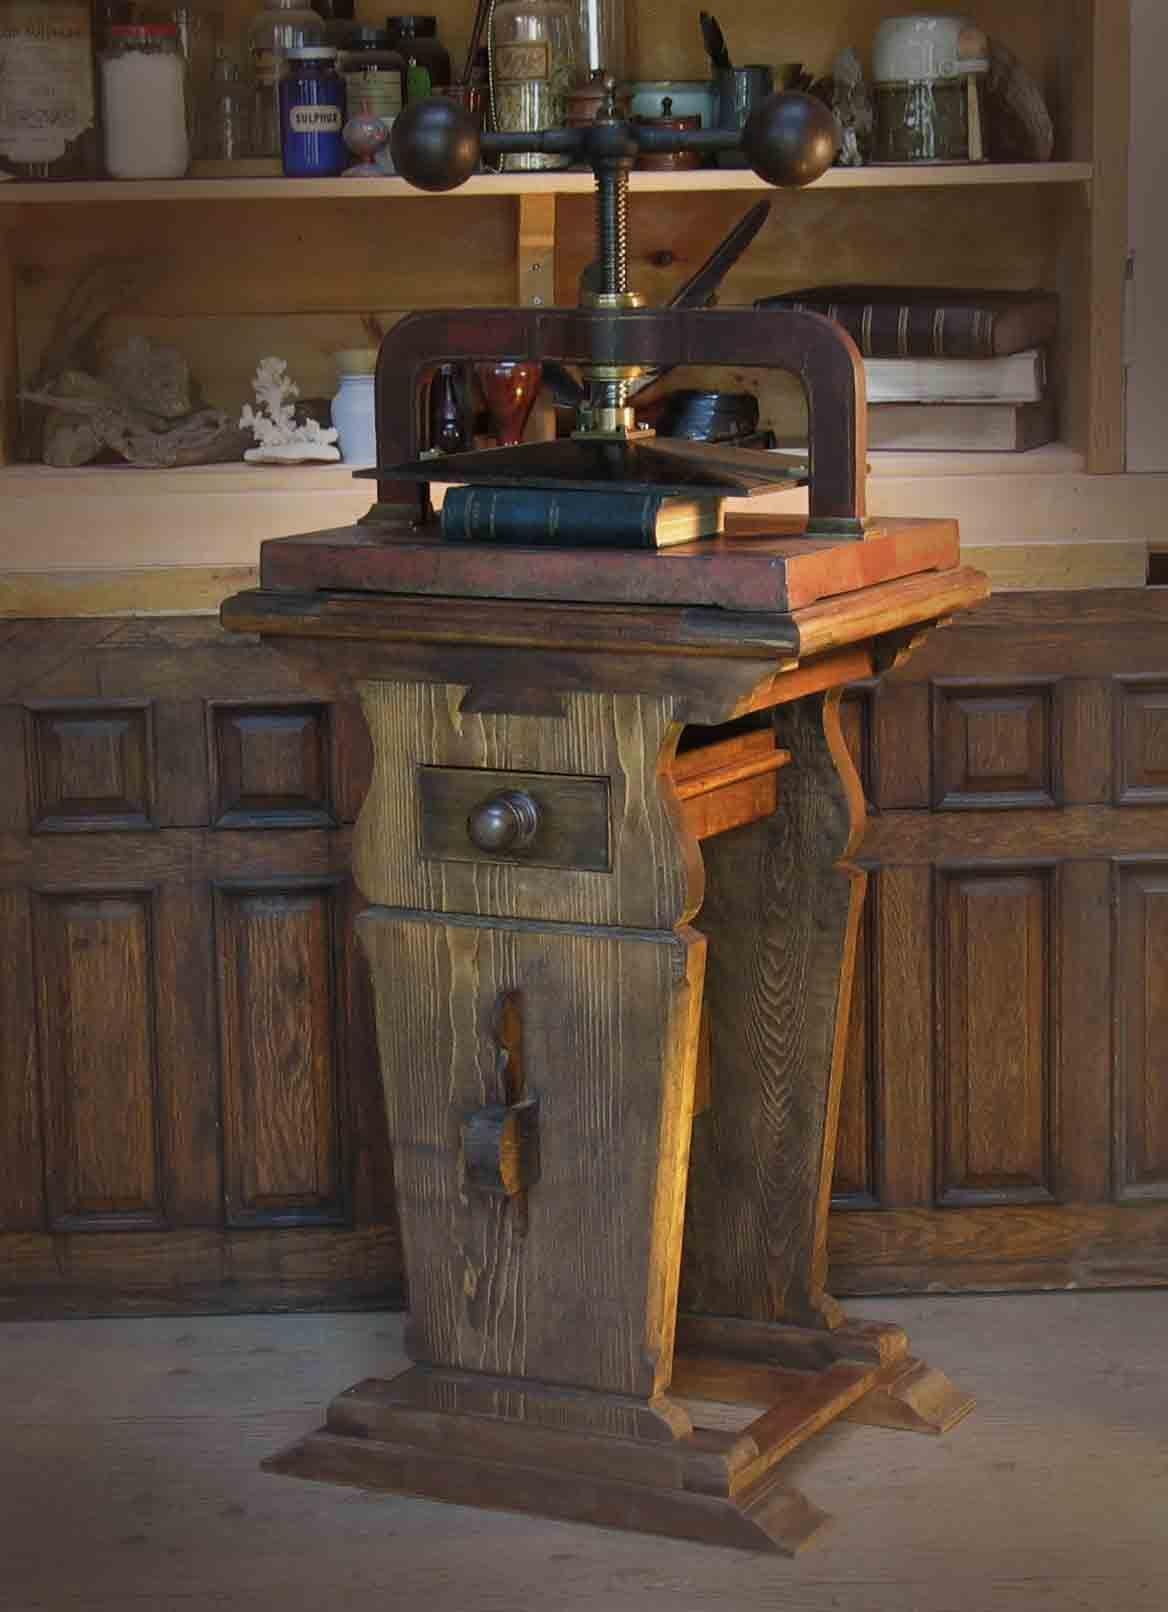 American Large Impressive Cast Iron Copying/Book Press on a Trestle Wood Stand circa 1850